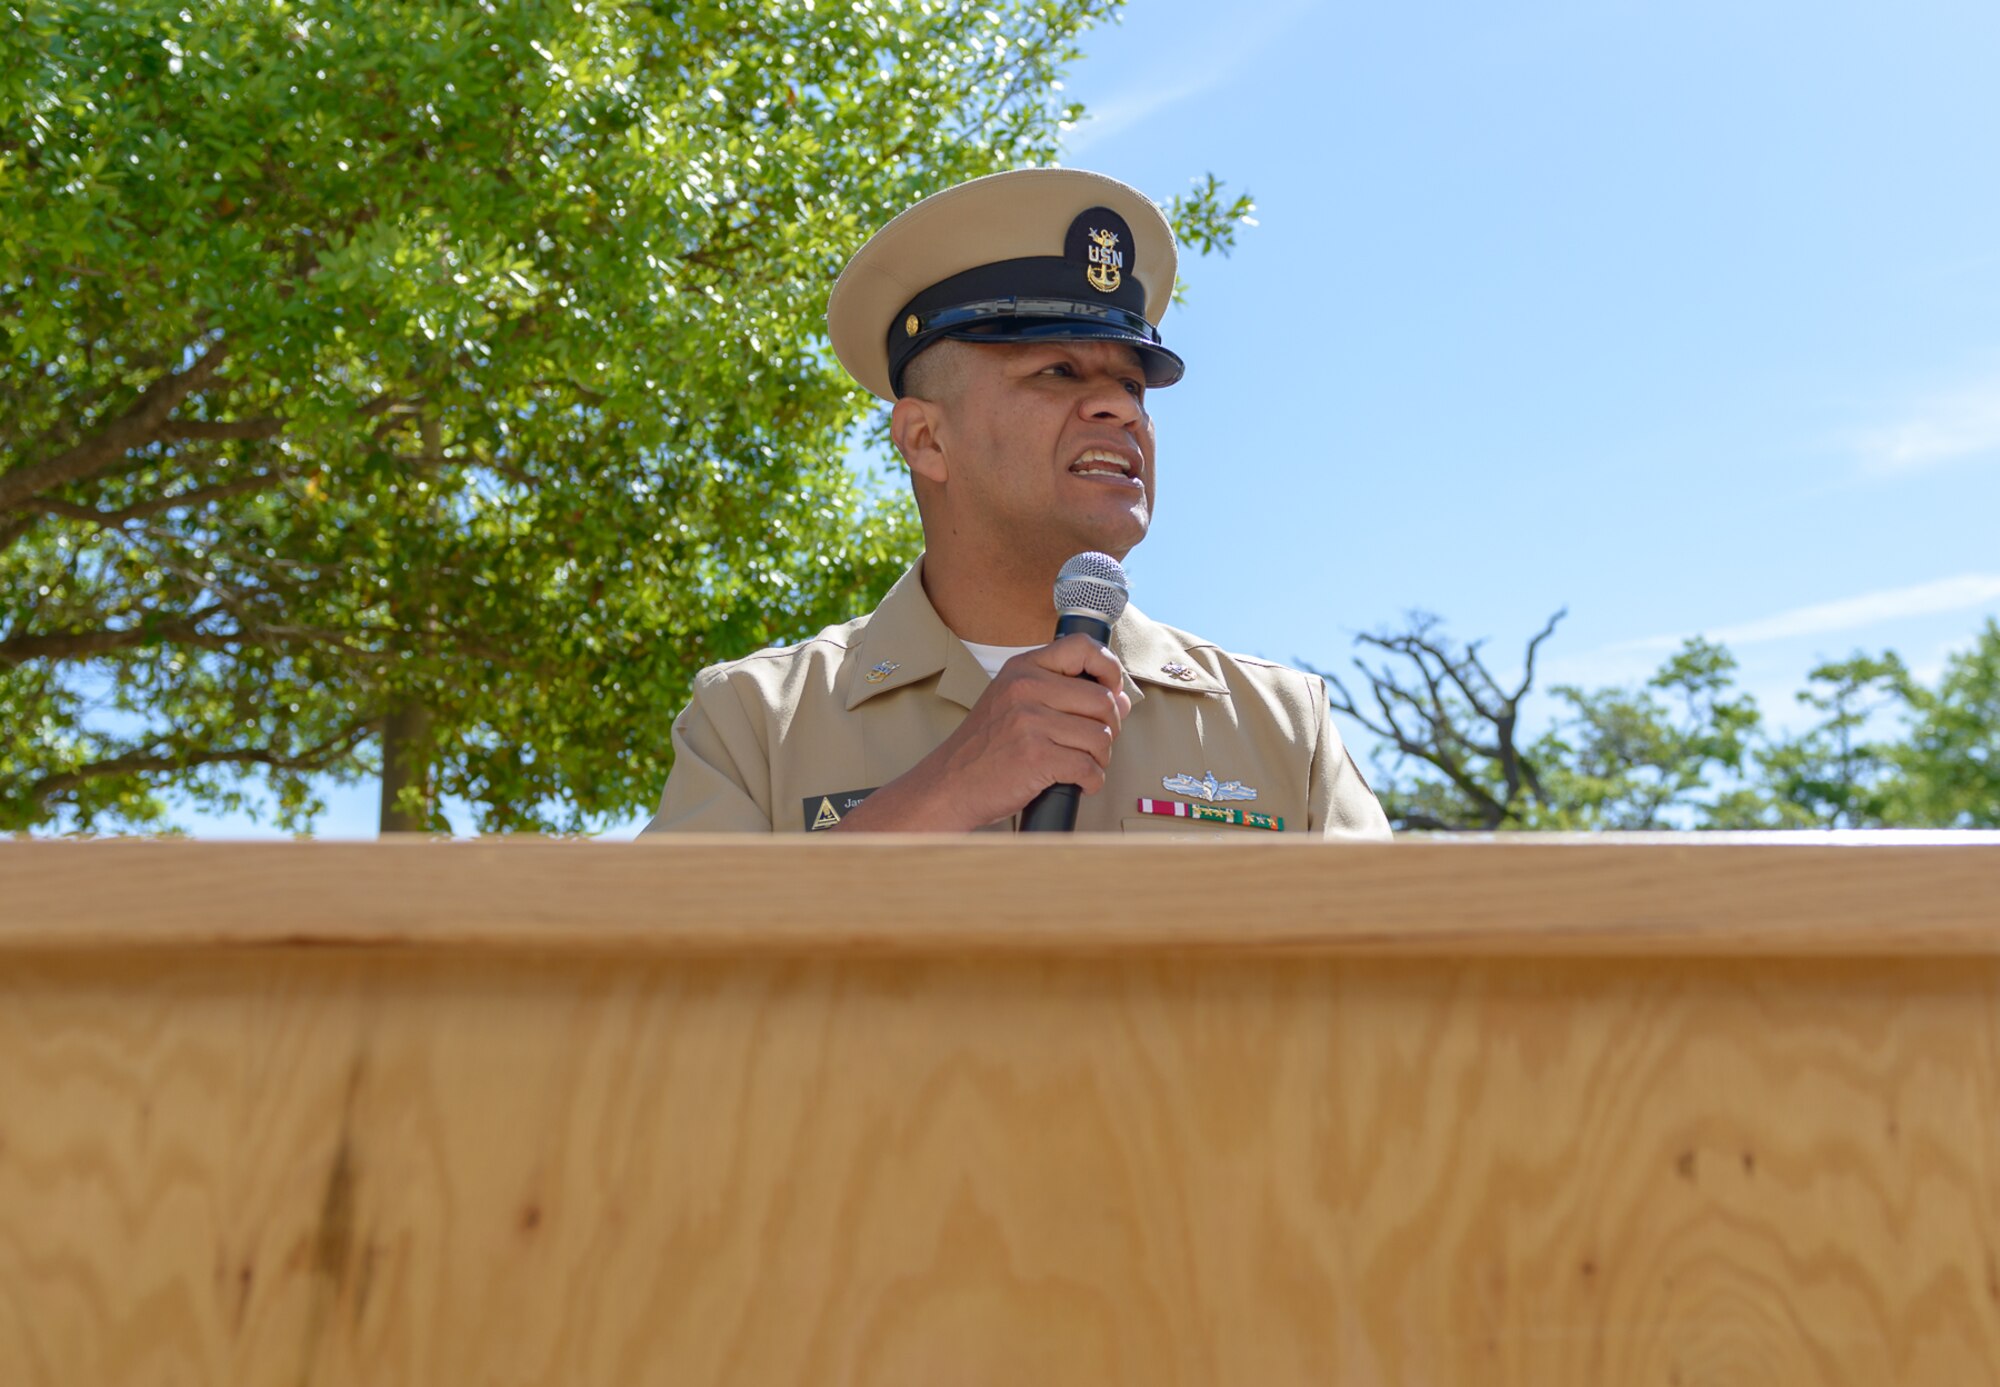 U.S. Navy Master Chief Petty Officer James Contreras, Center for Naval Aviation Technical Training Unit Keesler command master chief, delivers opening remarks during the CNATTU Keesler’s Chief Petty Officer Birthday Ceremony at Keesler Air Force Base, Mississippi, April 5, 2018. The U.S. Navy’s Chief Petty Officers are celebrating 125 years of heritage and the naval tradition of Unity, Service and Navigation, which is part of their rate emblem, is symbolized by a fouled anchor with the letters “USN” centered on the anchor. (U.S. Air Force photo by André Askew)